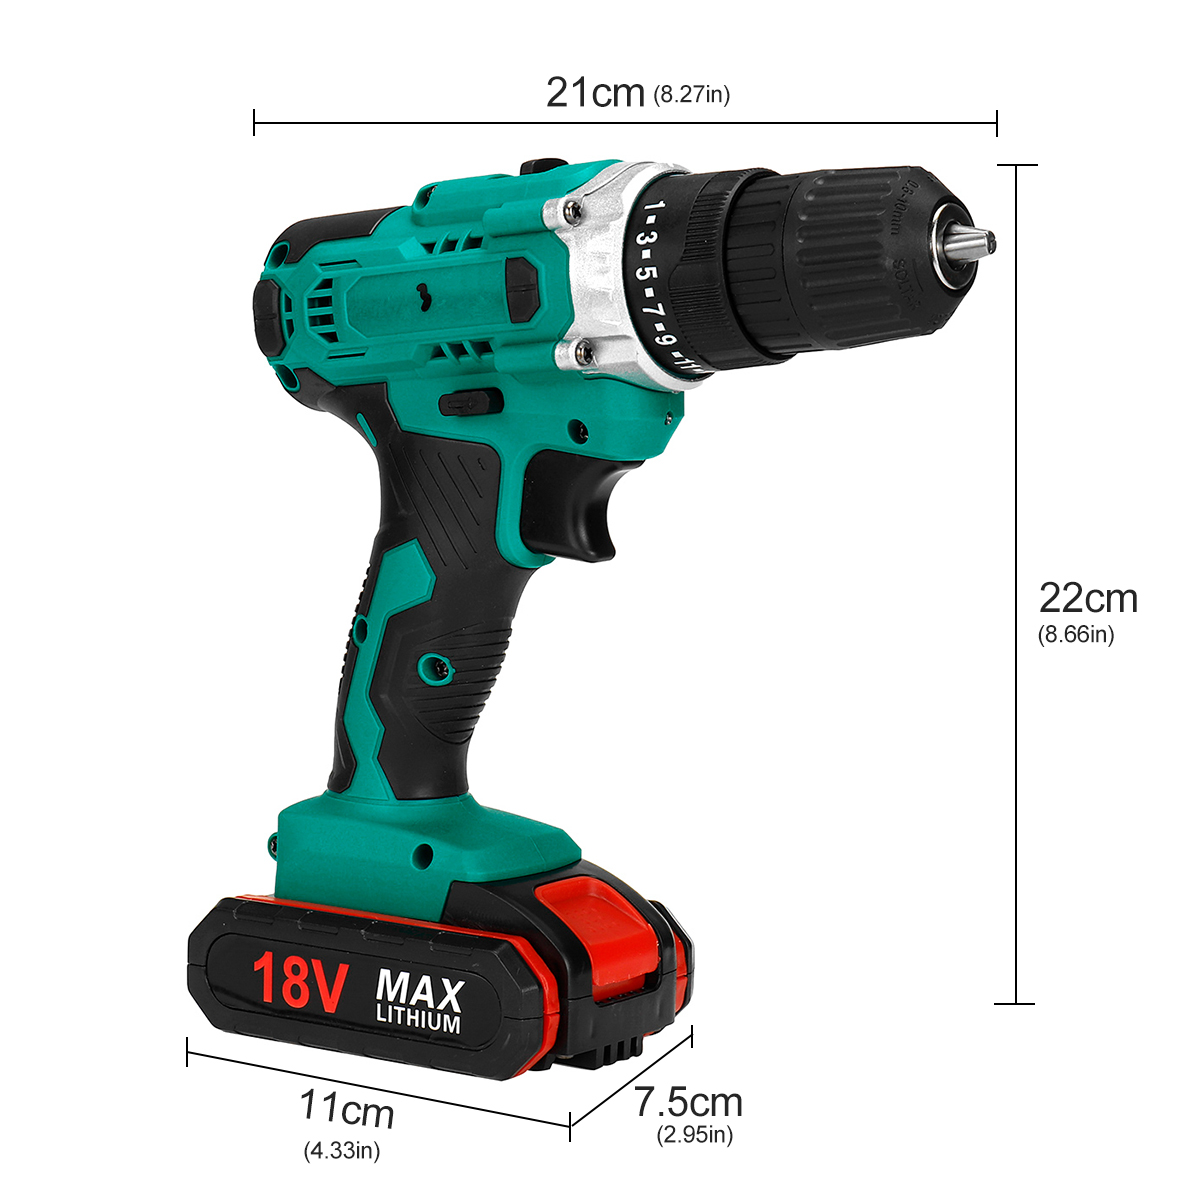 Multifunctional-3In1-Cordless-Electric-Screw-Driver-Drill-Wrench-38-Inch-Chuck-Rechargeable-Impact-D-1837415-11